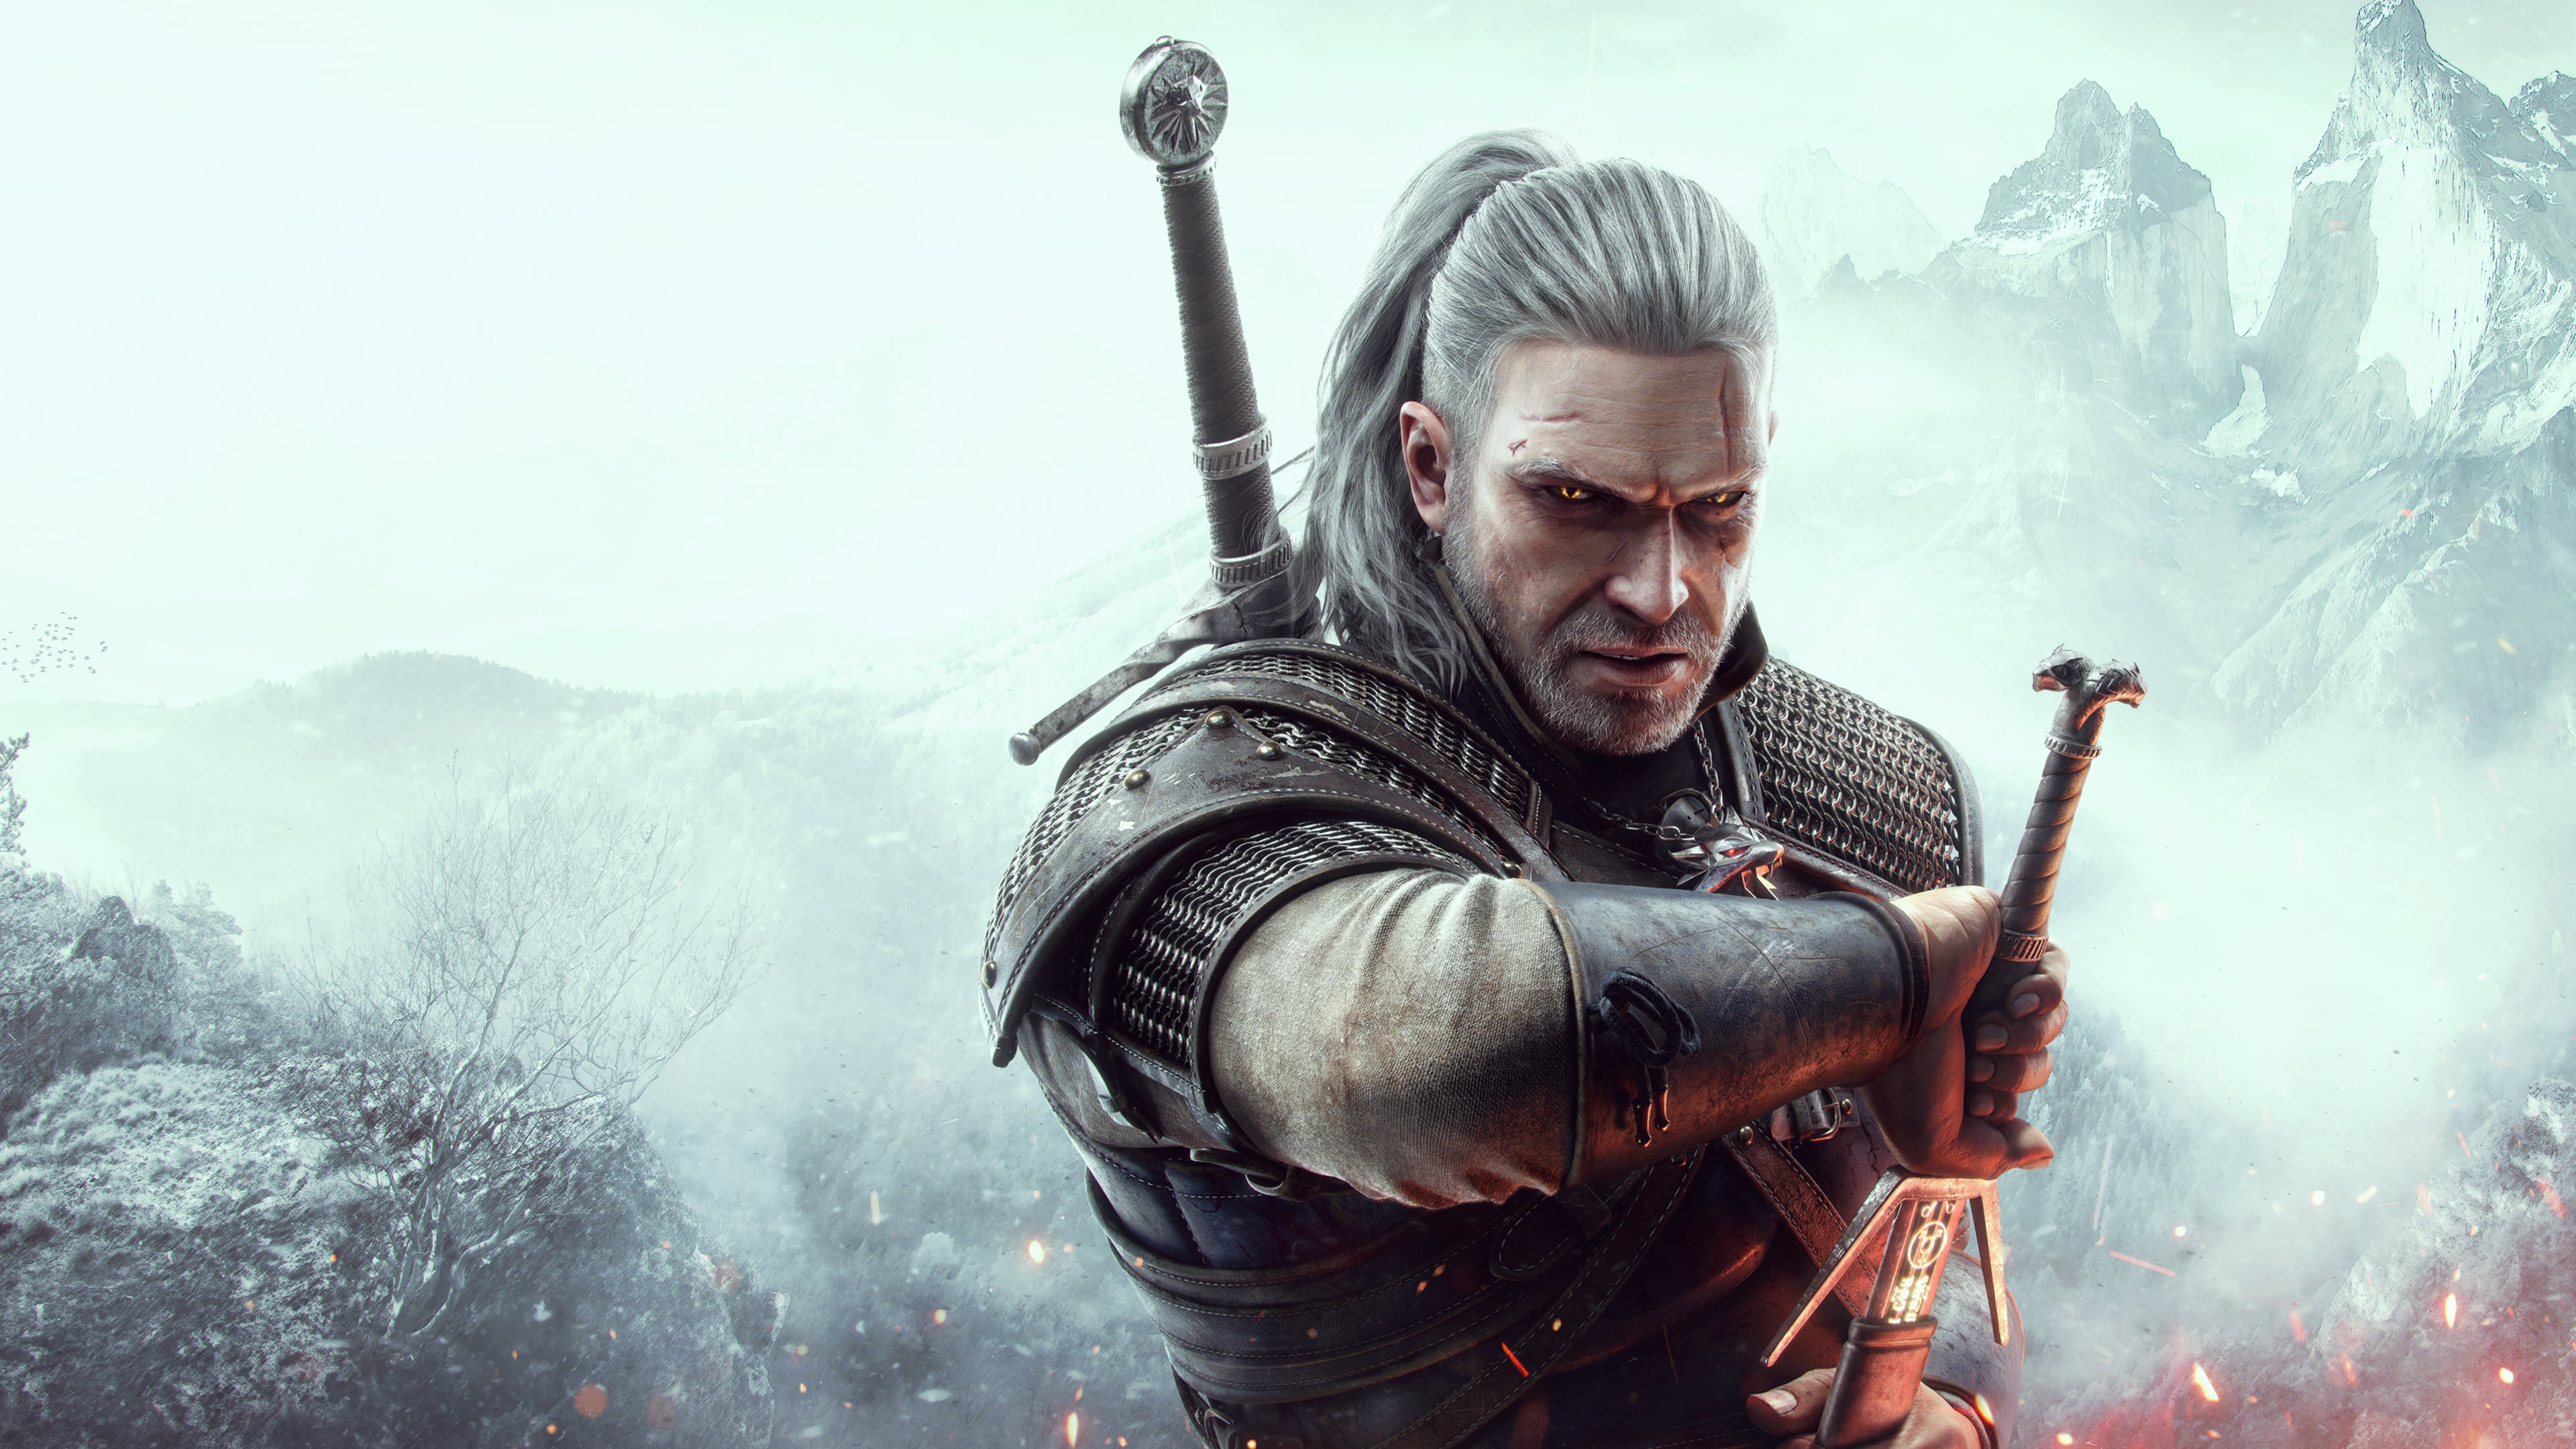 The Witcher 3: Wild Hunt – Complete Edition (Simplified Chinese, English, Korean, Traditional Chinese)